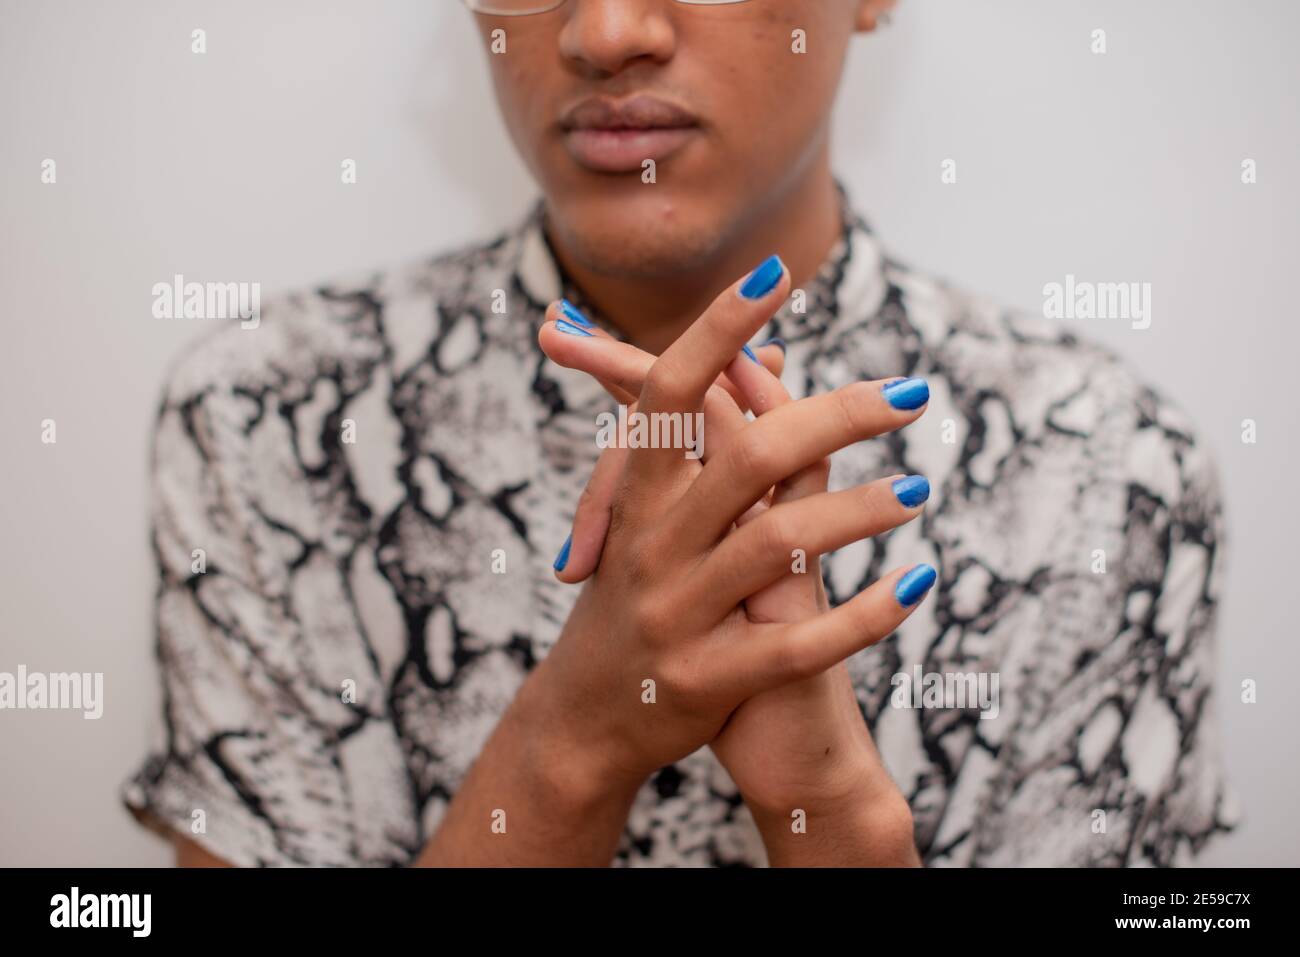 Portrait of young man with blue nail polish Stock Photo